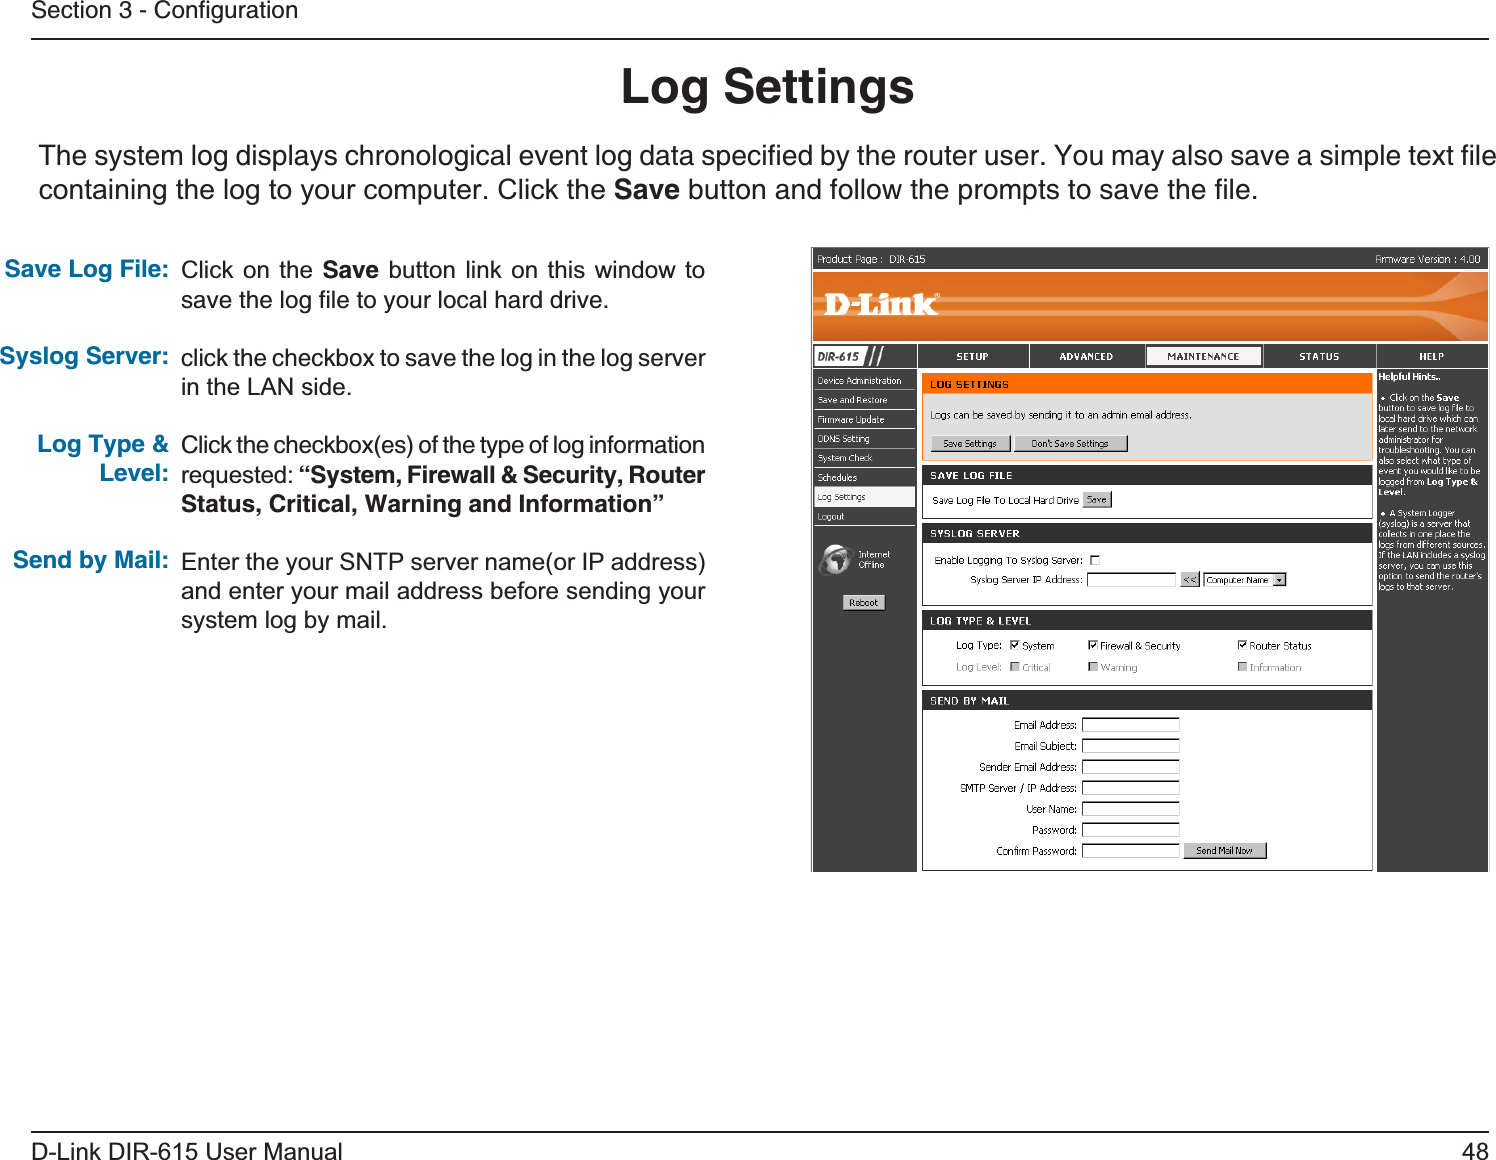 48D-Link DIR-615 User ManualSection 3 - ConﬁgurationLog SettingsClick on the Save button link on this window to save the log ﬁle to your local hard drive.click the checkbox to save the log in the log server in the LAN side.Click the checkbox(es) of the type of log information requested: “System, Firewall &amp; Security, Router Status, Critical, Warning and Information”Enter the your SNTP server name(or IP address) and enter your mail address before sending your system log by mail.Save Log File:Syslog Server:Log Type &amp; Level:Send by Mail:The system log displays chronological event log data speciﬁed by the router user. You may also save a simple text ﬁle containing the log to your computer. Click the Save button and follow the prompts to save the ﬁle.